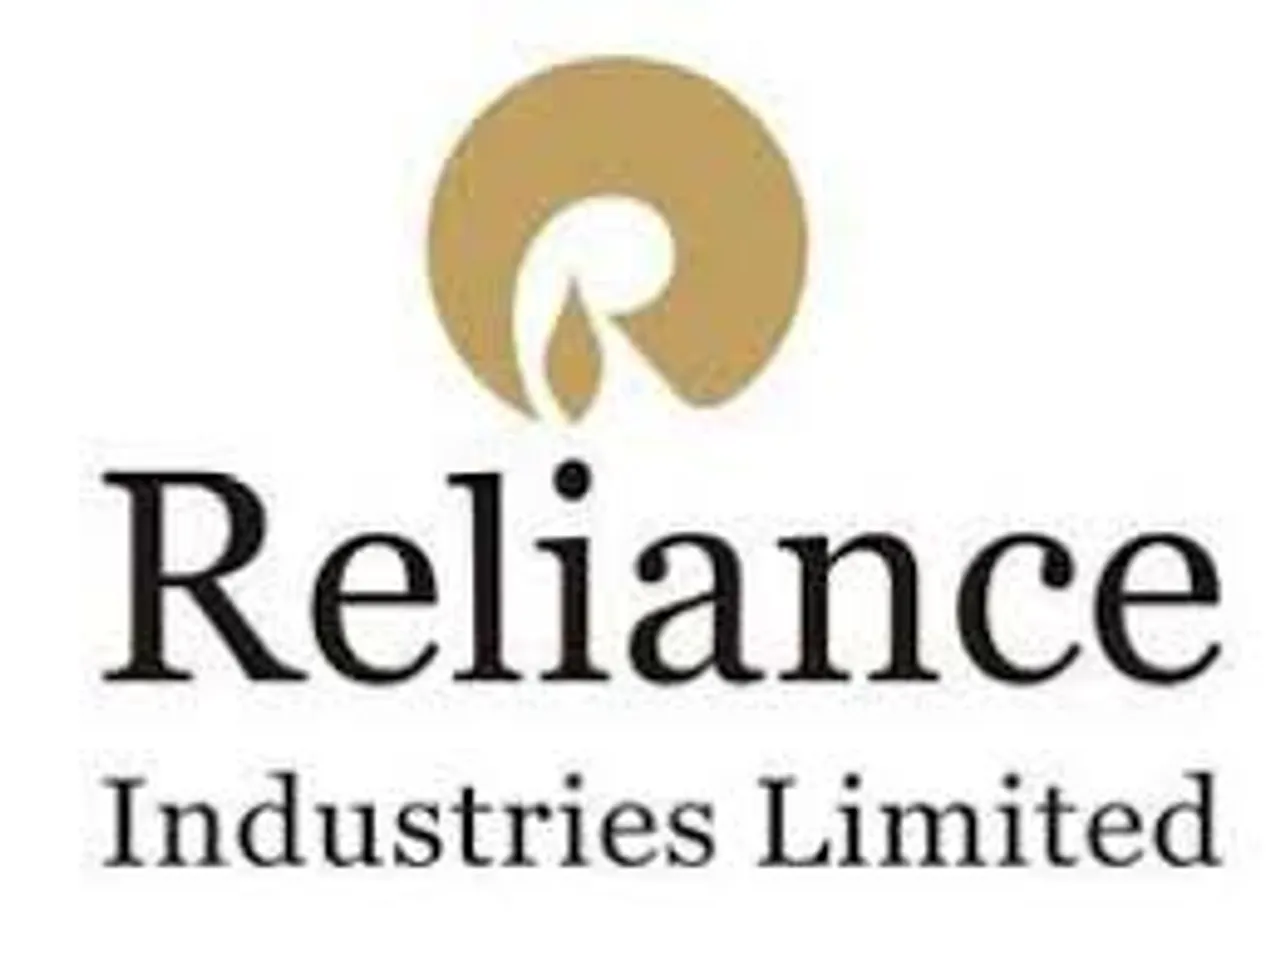 Reliance India Limited Chooses Youtube as a Medium to Respond to Accusations